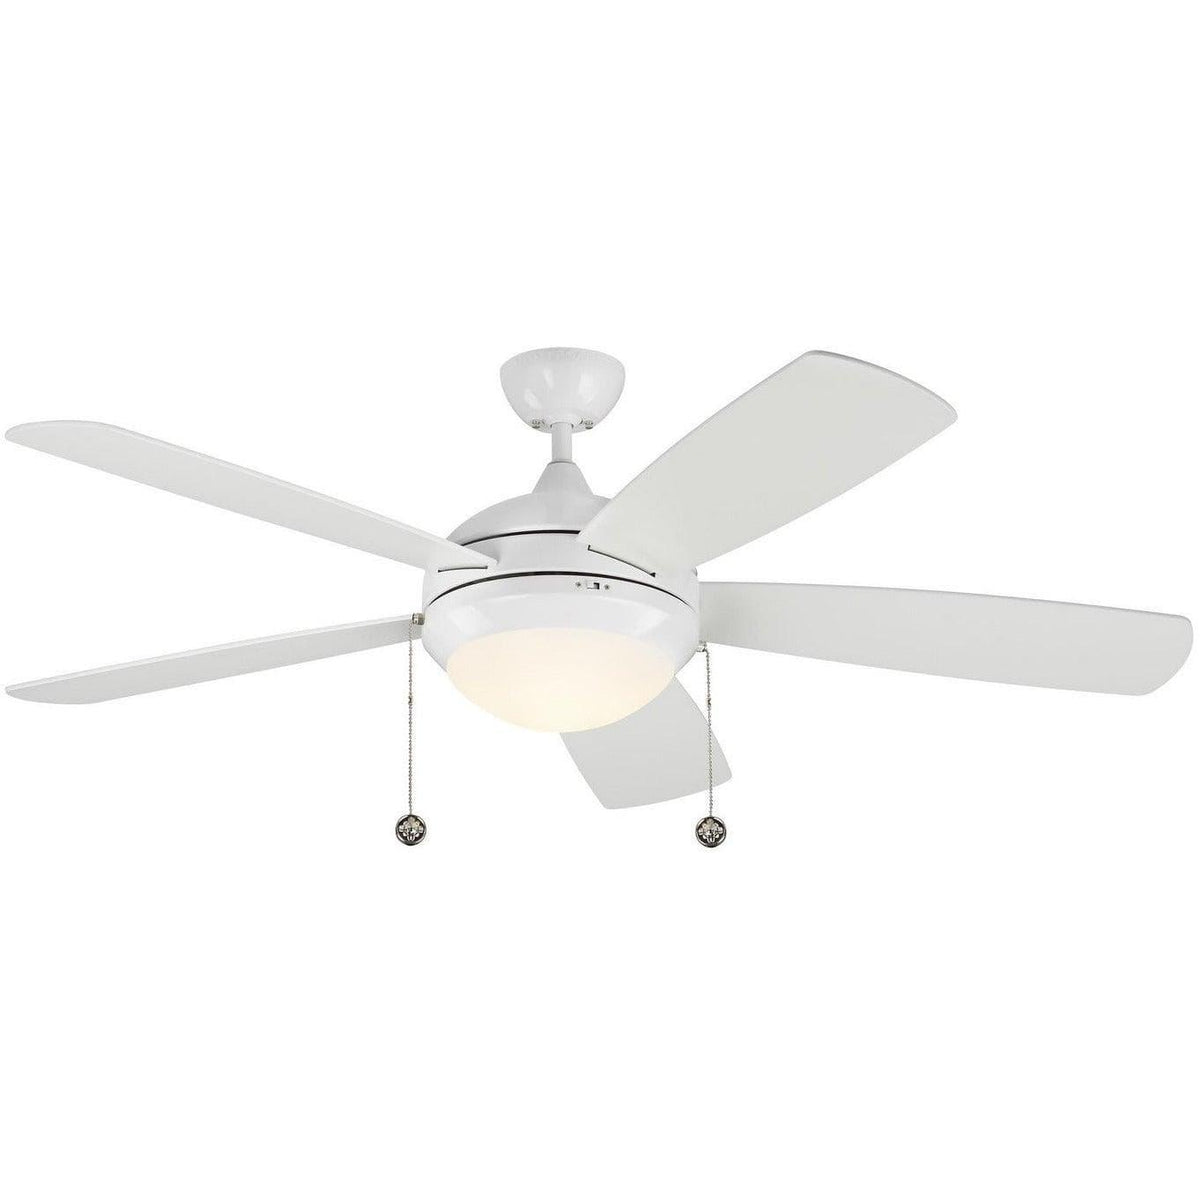 Visual Comfort Fan Collection - Discus Classic 52" Ceiling Fan - 5DIC52WHD-V1 | Montreal Lighting & Hardware